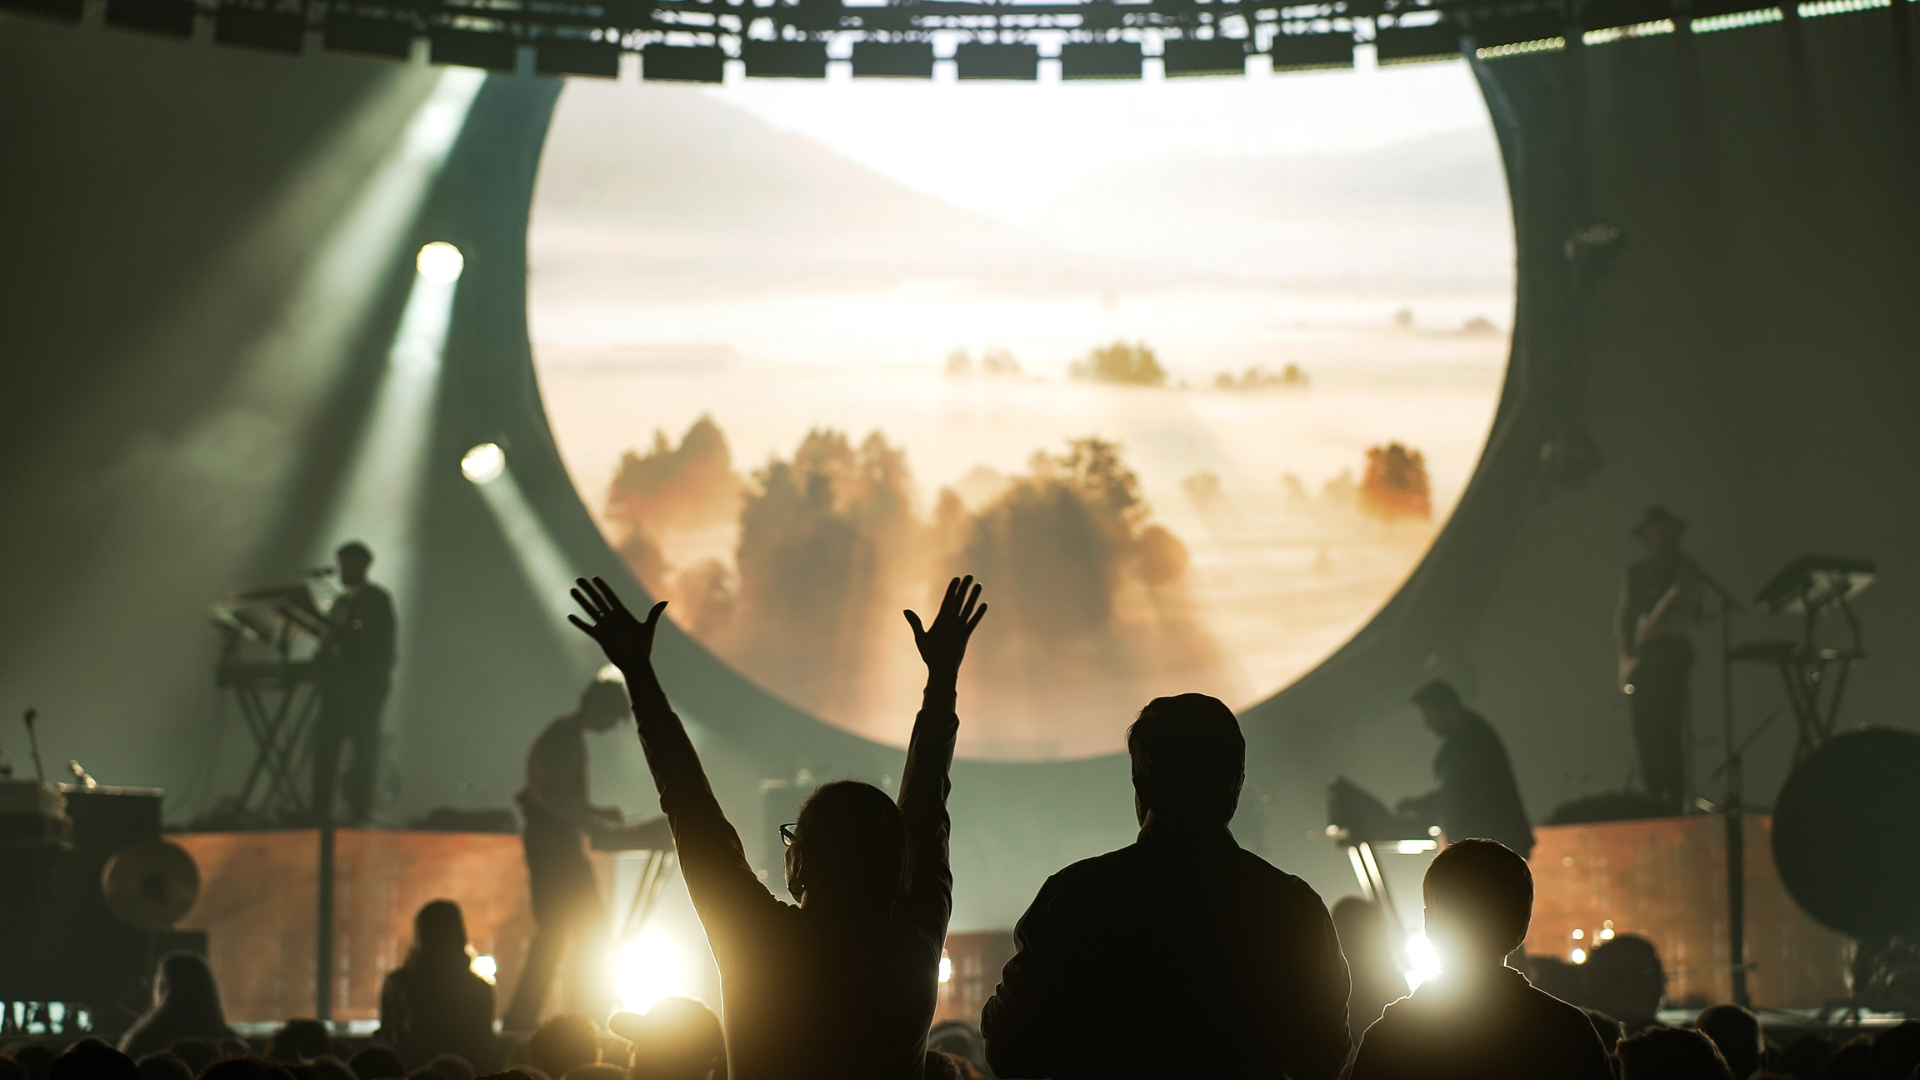 A woman and man standing side by side with their hands raised while worshiping at a for KING & COUNTRY concert